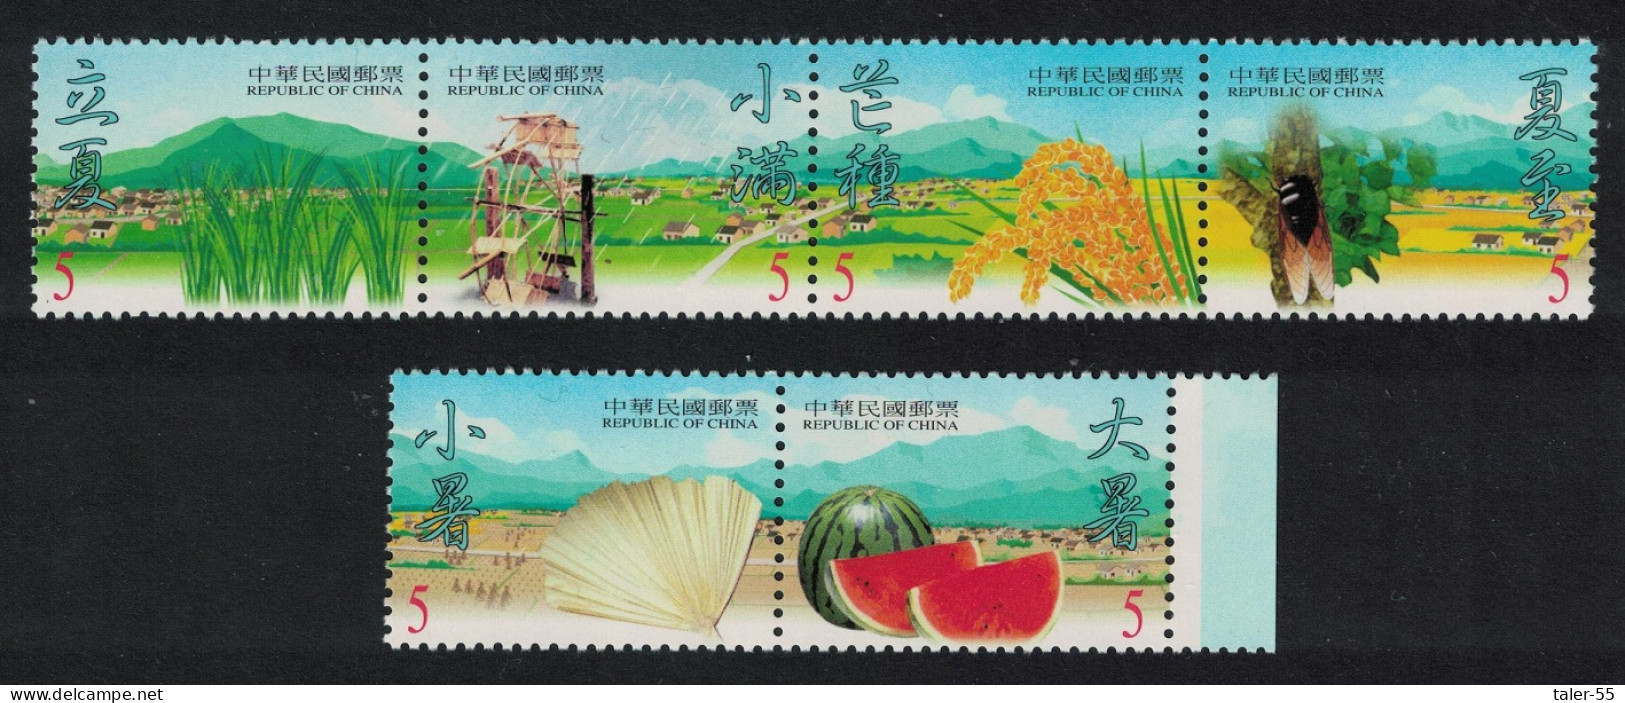 Taiwan Watermelons Seasonal Periods Of Summer 6v 2000 MNH SG#2636-2641 - Unused Stamps